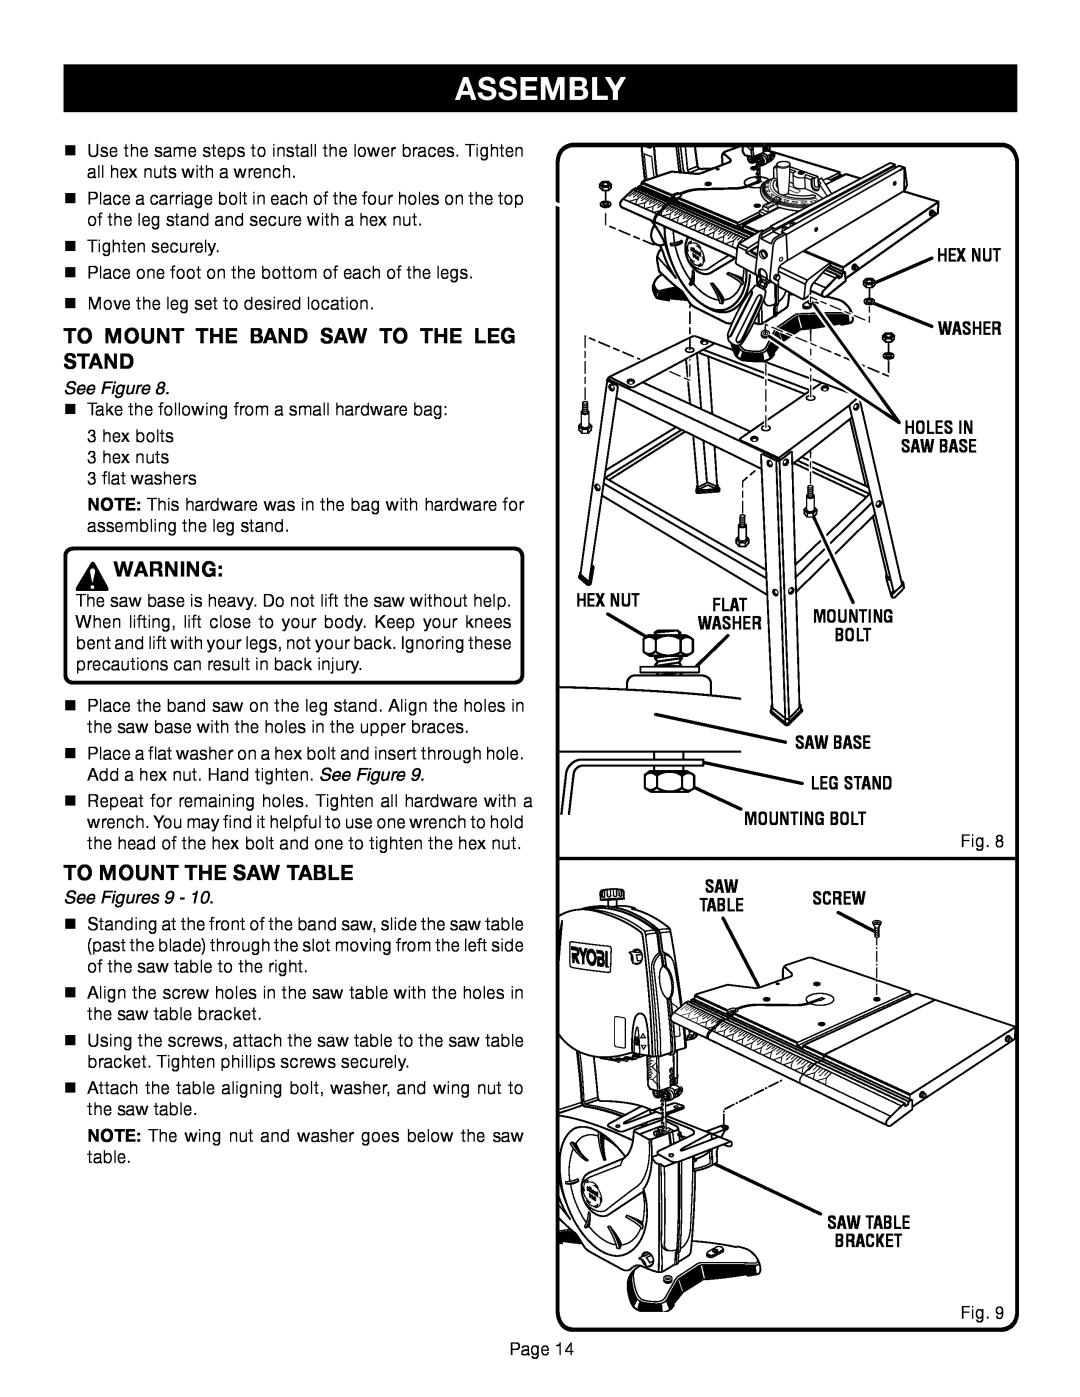 Ryobi BS1001SV manual Assembly, Hex Nut Washer Holes In Saw Base, Saw Base Leg Stand Mounting Bolt, See Figures 9 